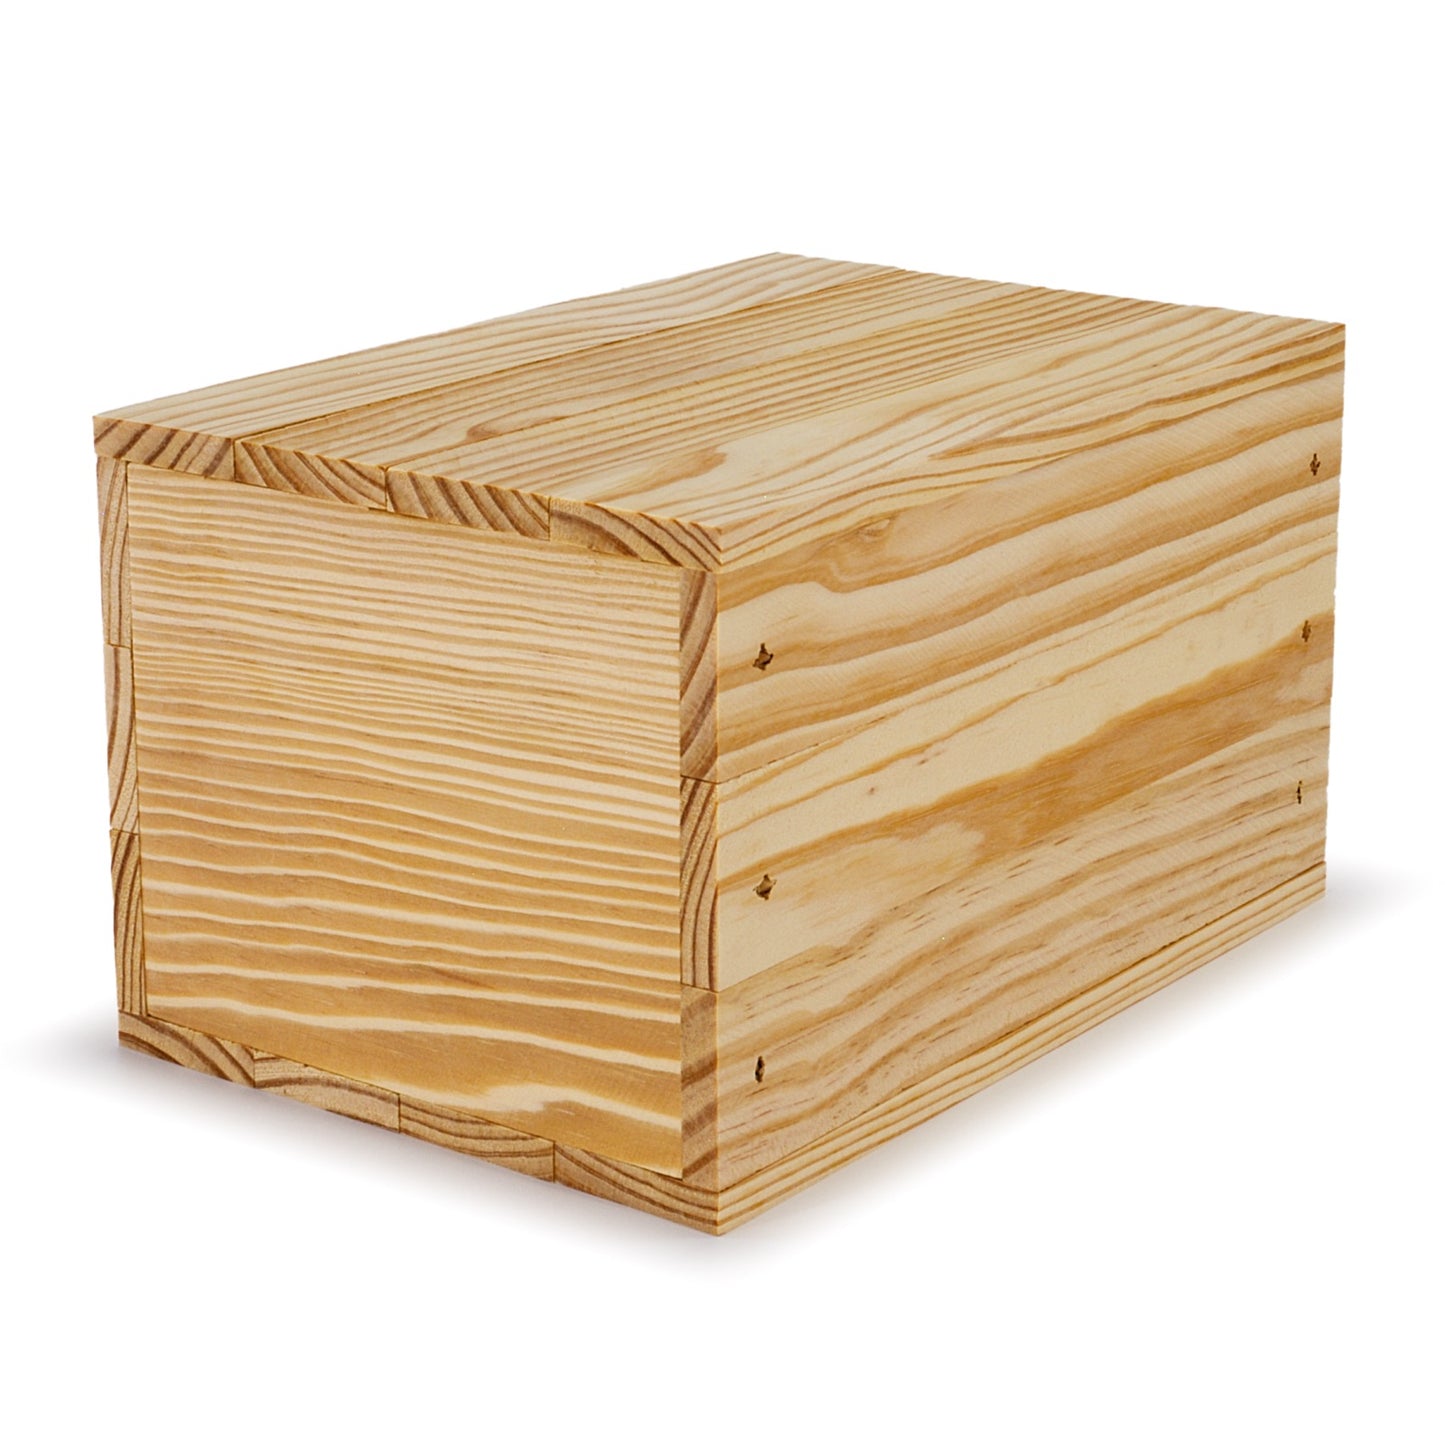 Small wooden crate with lid 9x6.25x5.25, 6-BX-9-6.25-5.25-NX-NW-LL, 12-BX-9-6.25-5.25-NX-NW-LL, 24-BX-9-6.25-5.25-NX-NW-LL, 48-BX-9-6.25-5.25-NX-NW-LL, 96-BX-9-6.25-5.25-NX-NW-LL